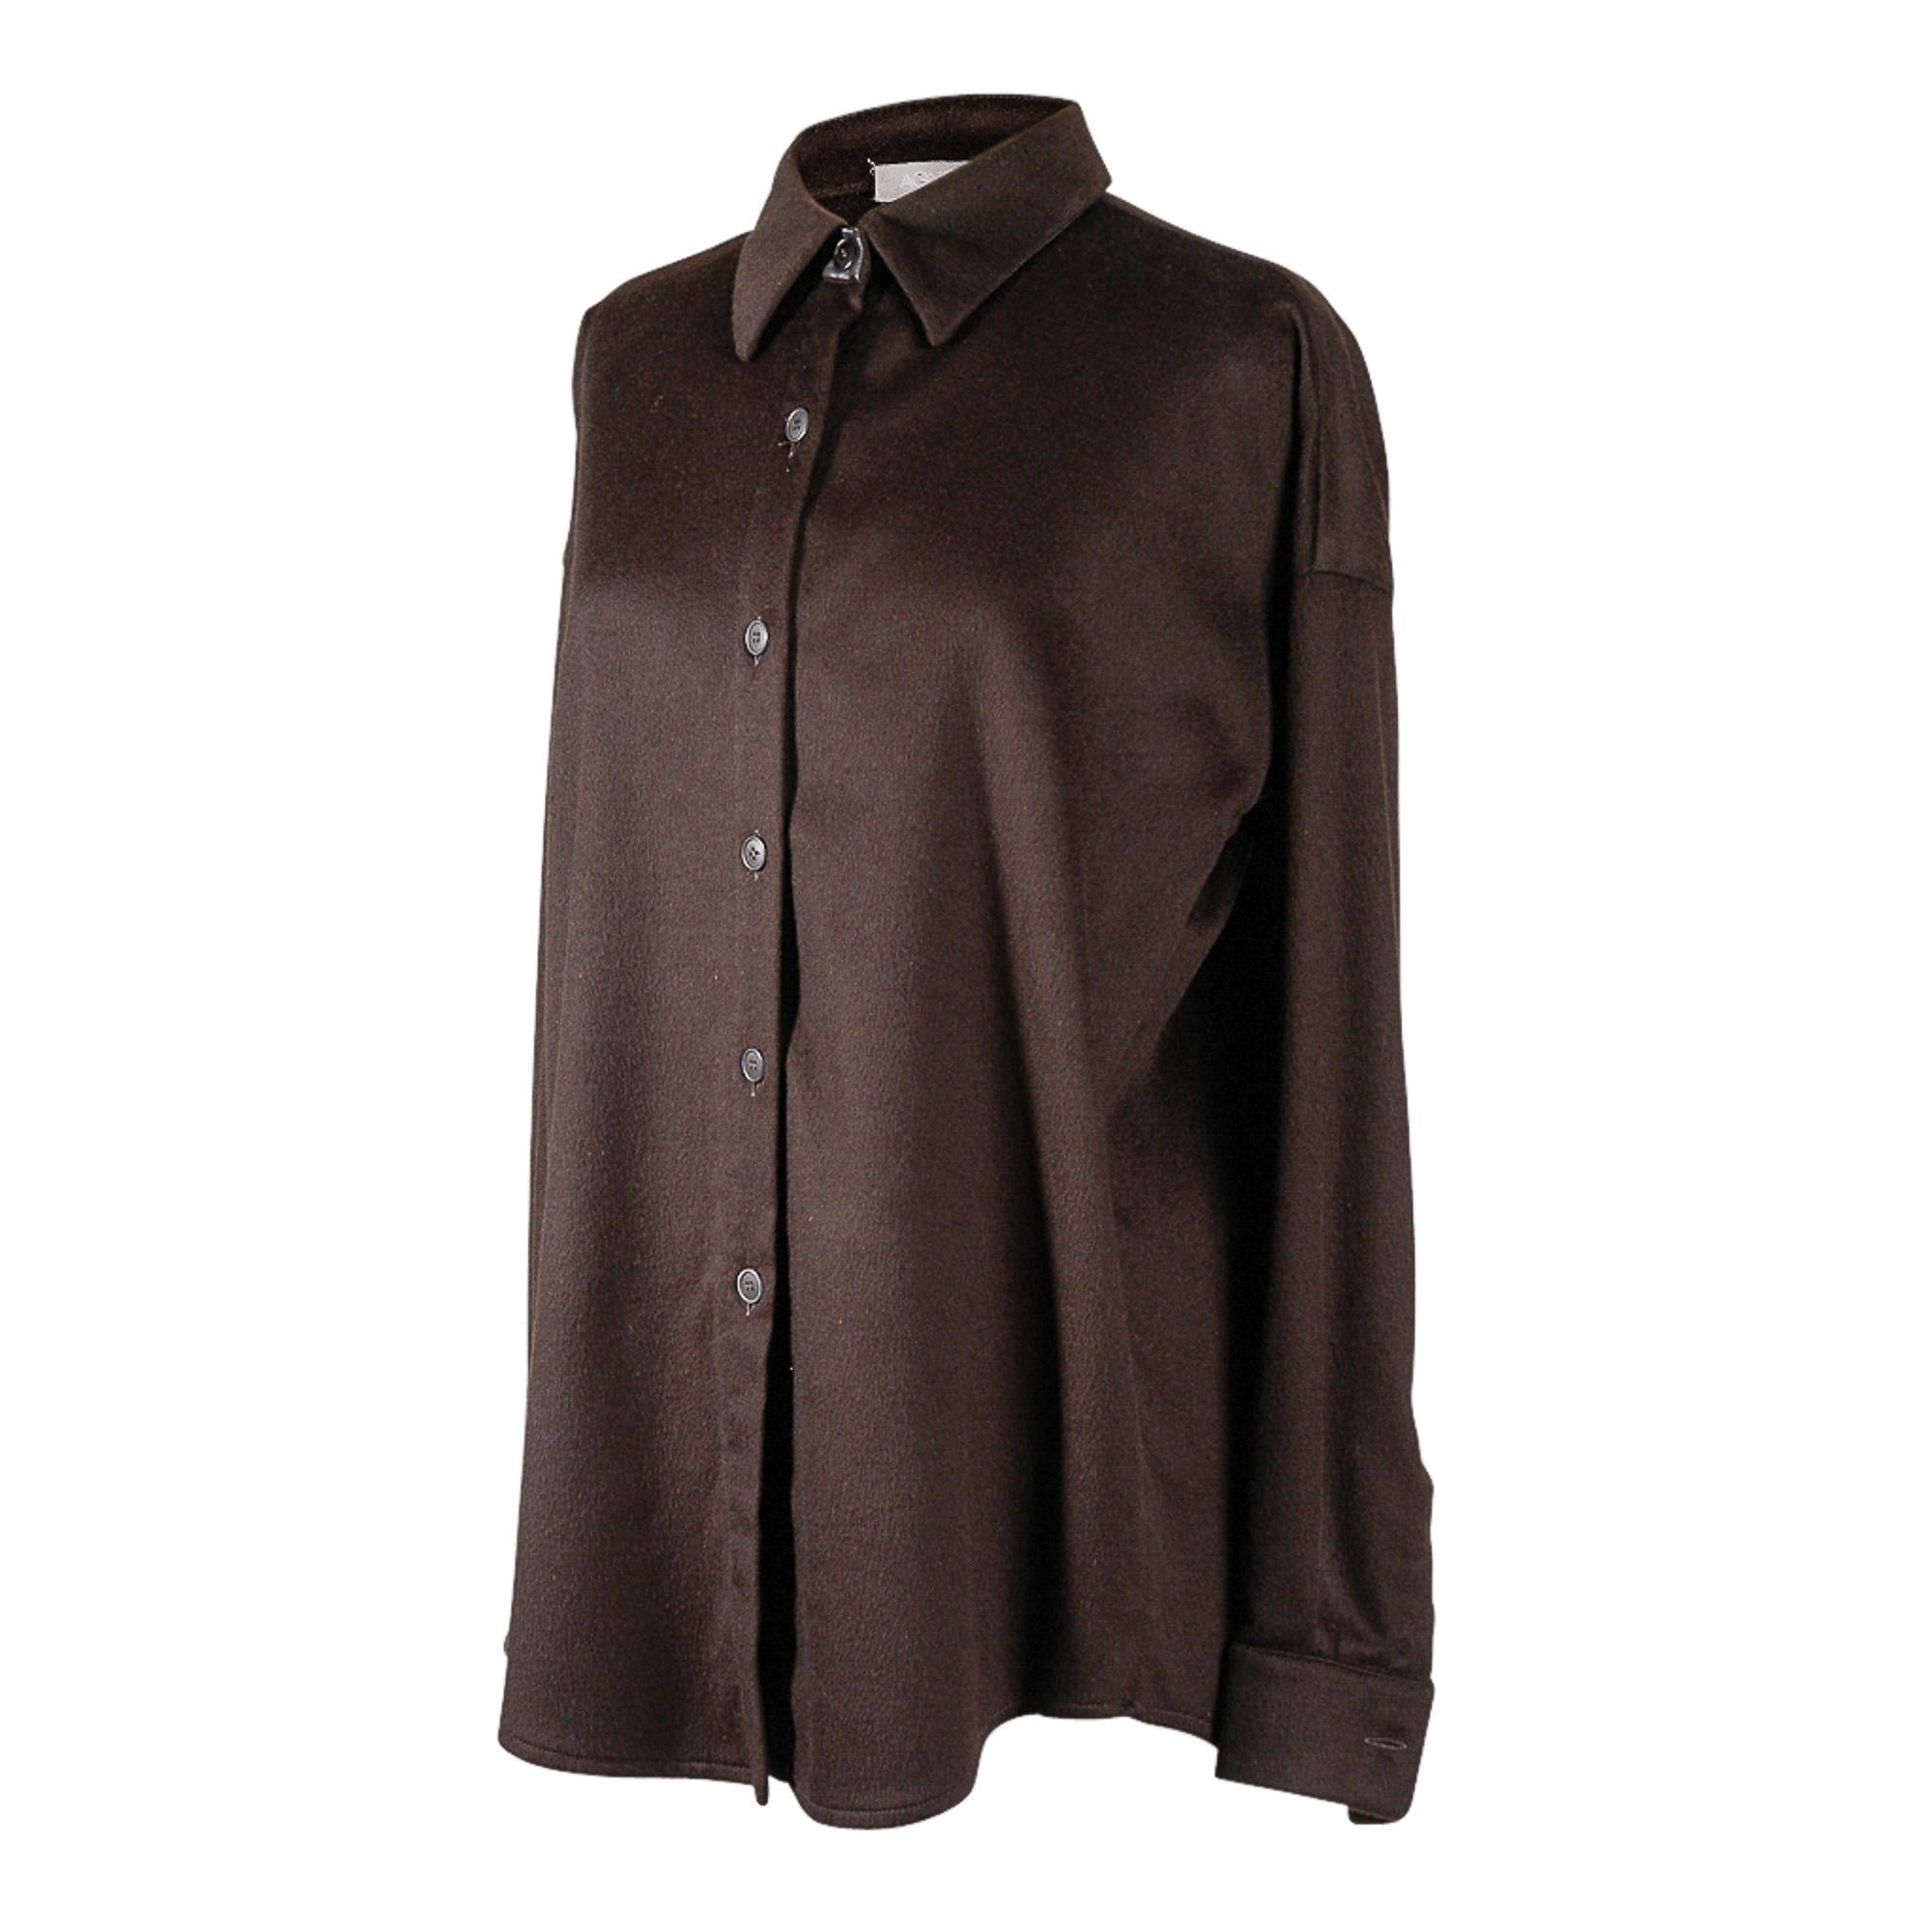 Guaranteed authentic Agnona Cashmere and Leather detailed shirt lush chocolate brown.
Underneath the collar and cuffs is velvet soft chocolate leather.
The rear yoke of the shirt has a thin leather 'loop'.
final sale

SIZE 46
USA 12

TOP MEASURES: